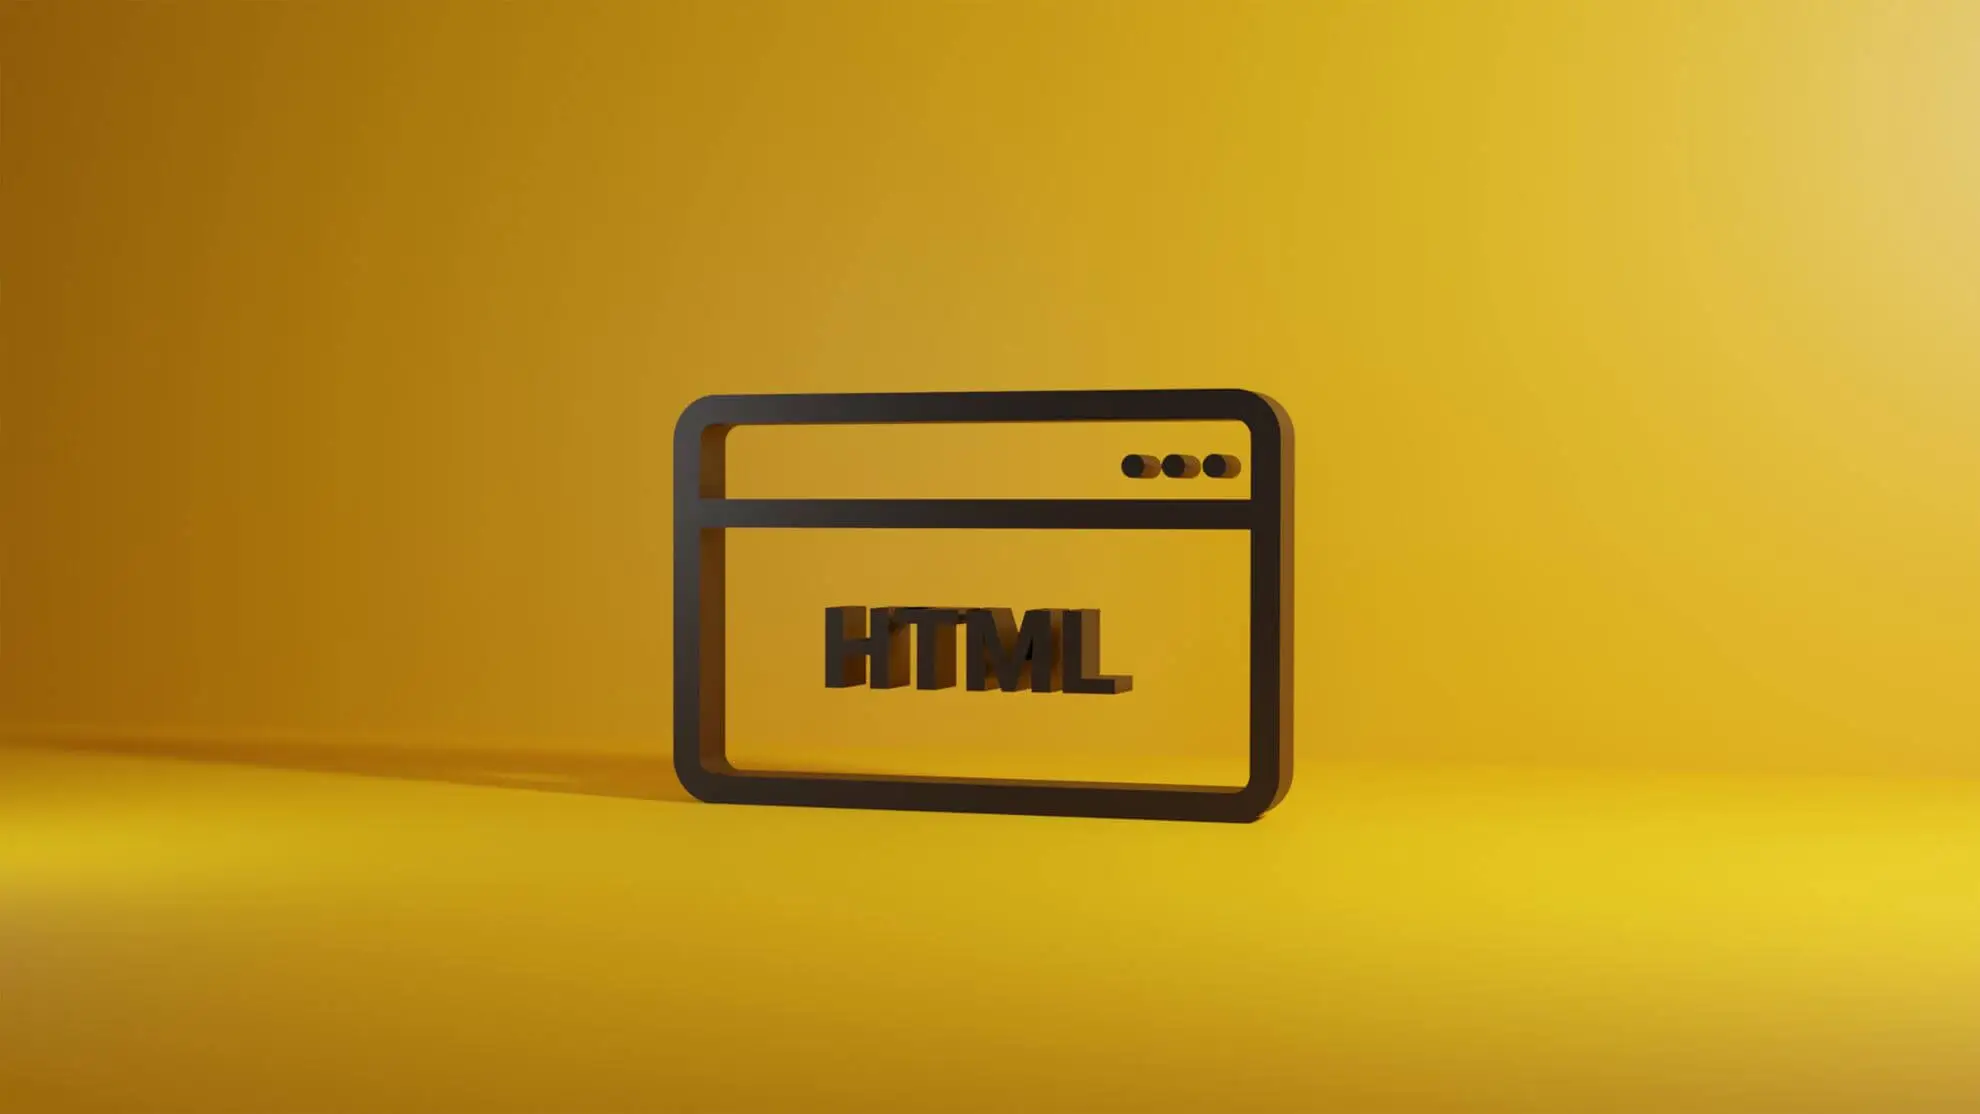 html in yellow background